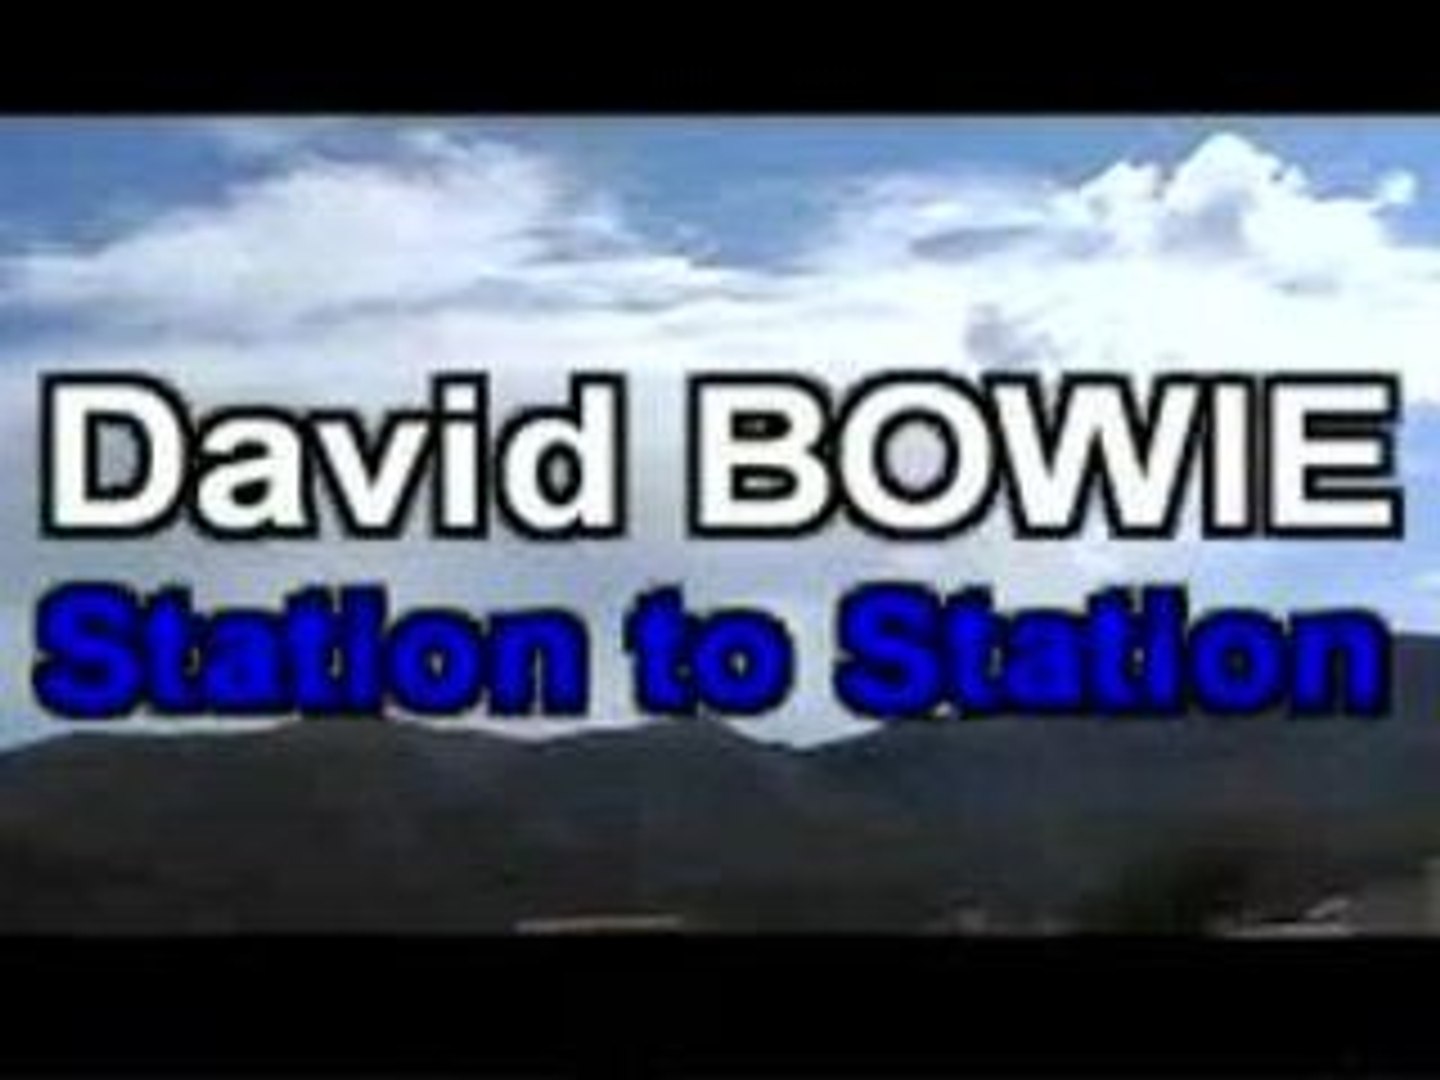 David BOWIE * Station to station *